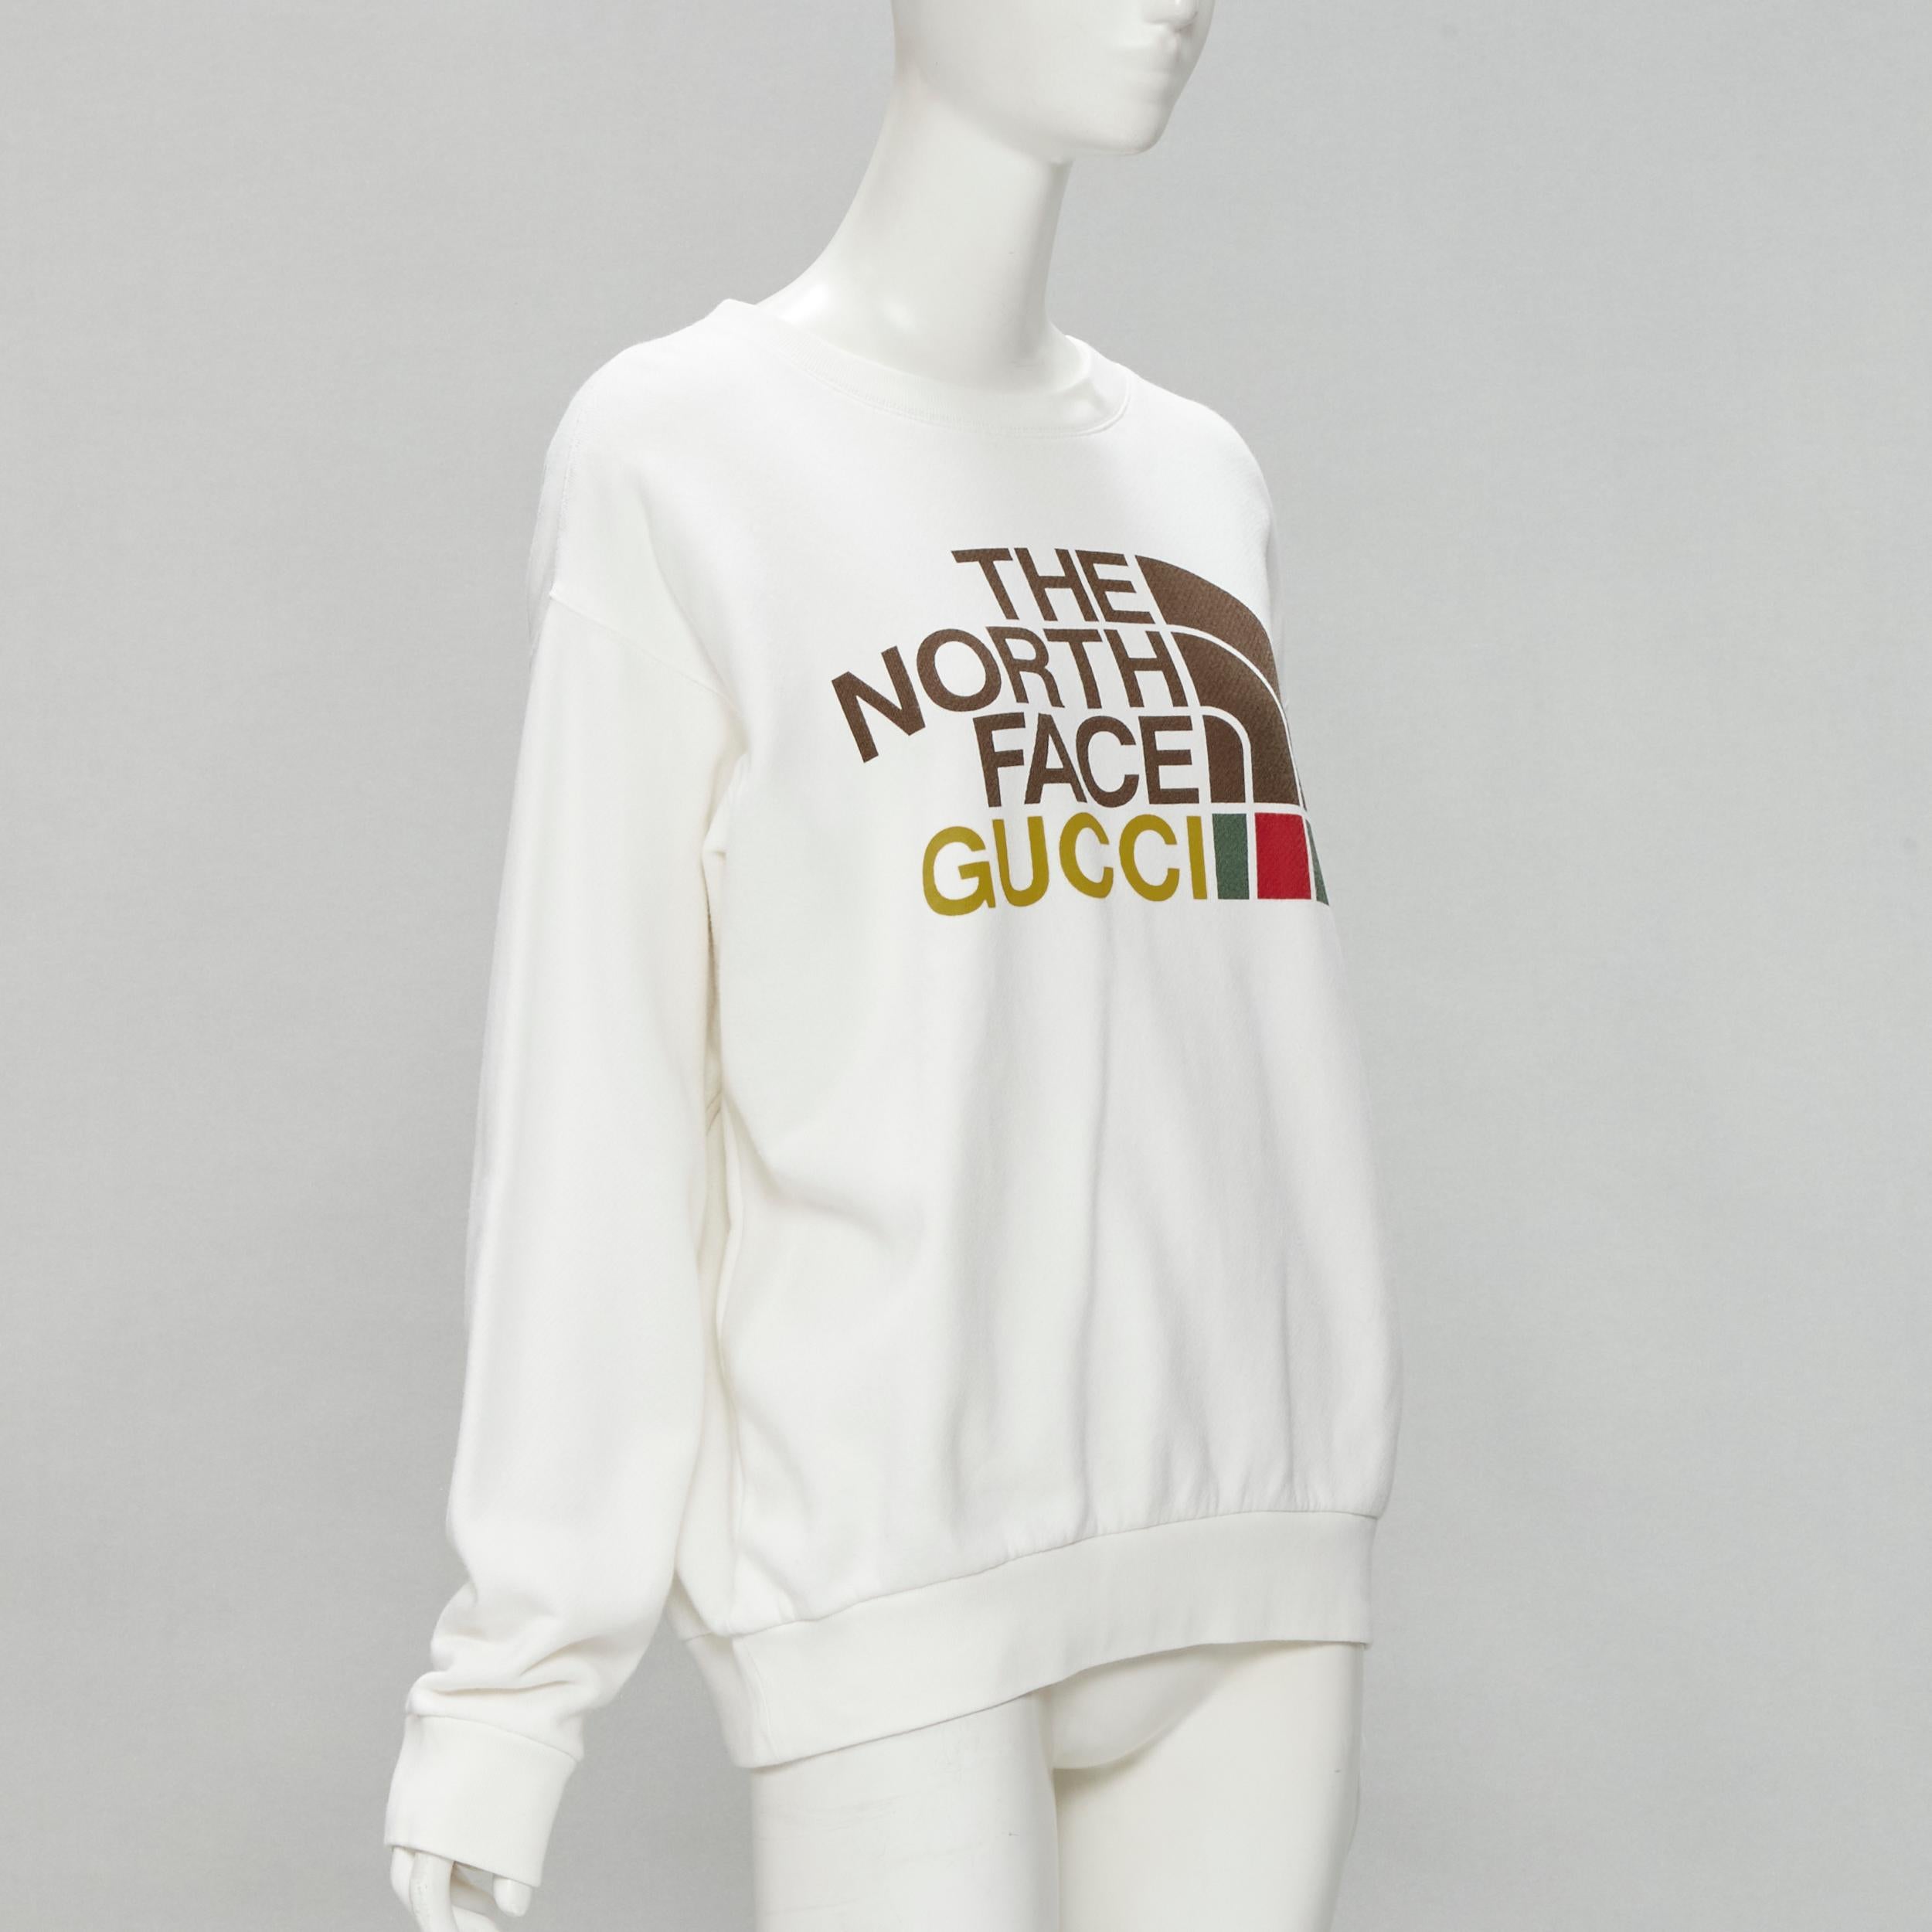 GUCCI THE NORTH FACE logo print white cotton oversized sweatshirt pullover XS In Excellent Condition For Sale In Hong Kong, NT